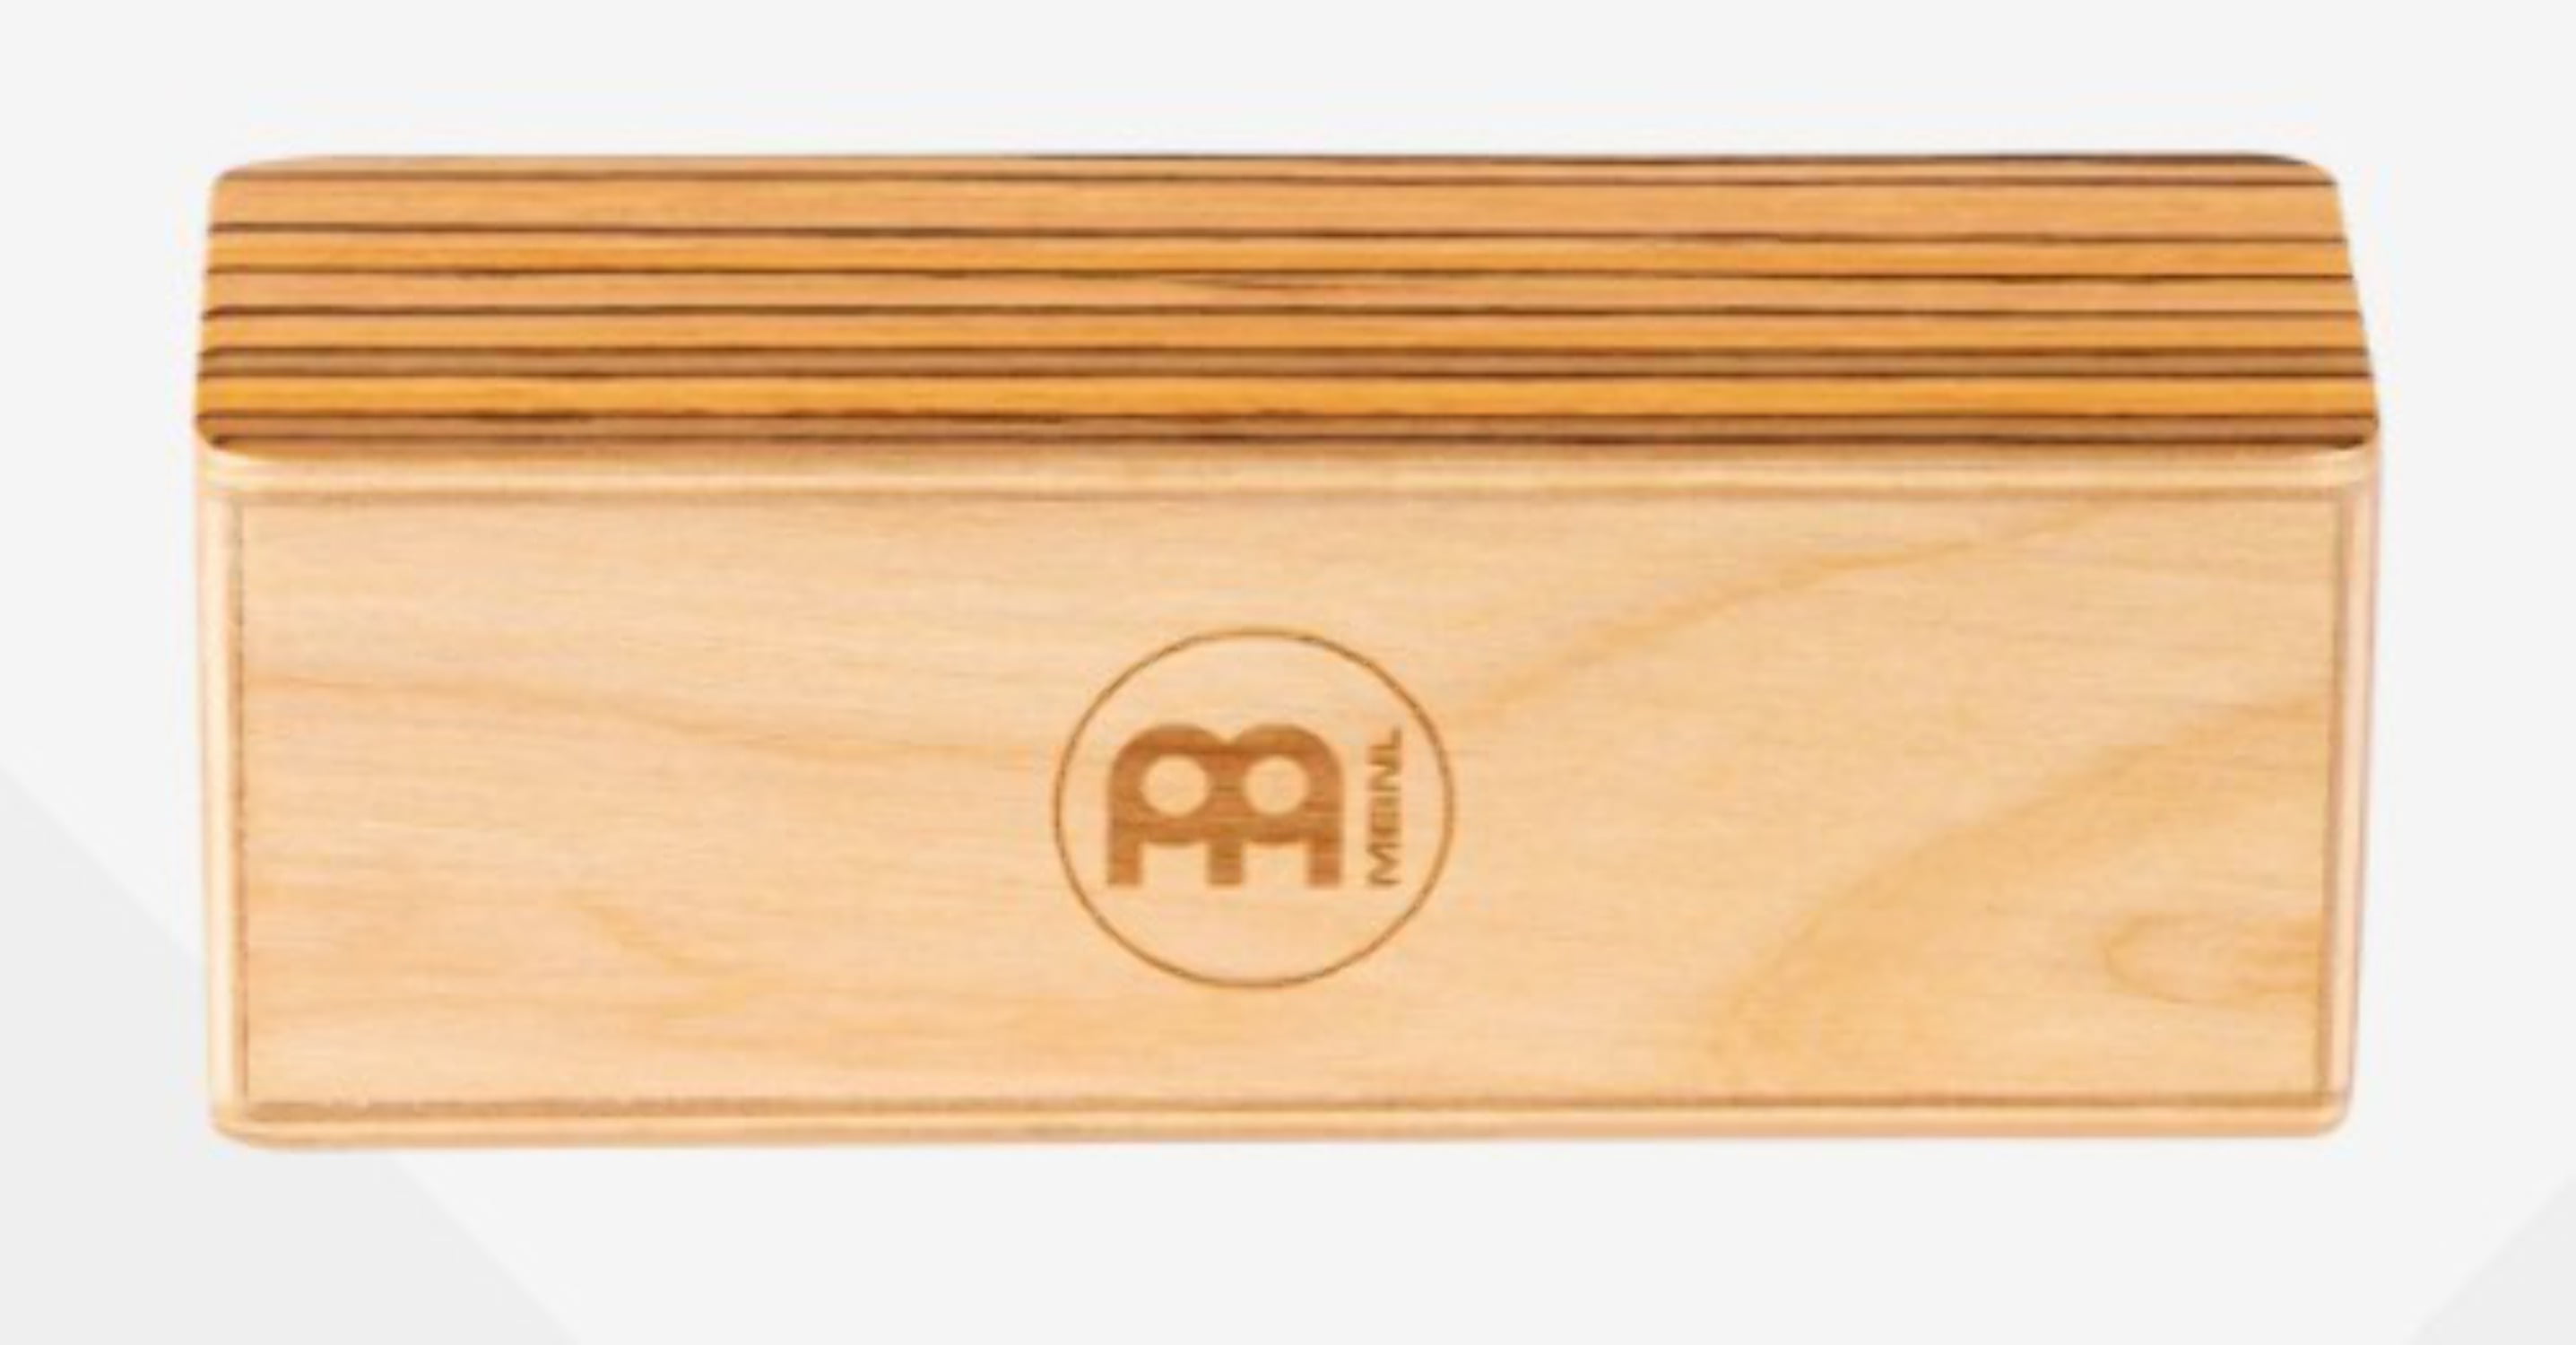 2-Year Warranty, Meinl Percussion Wood Shaker with Exotic Zebrano Top and Bottom Medium Size-NOT Made in China-Baltic Birch Body SH53-M 